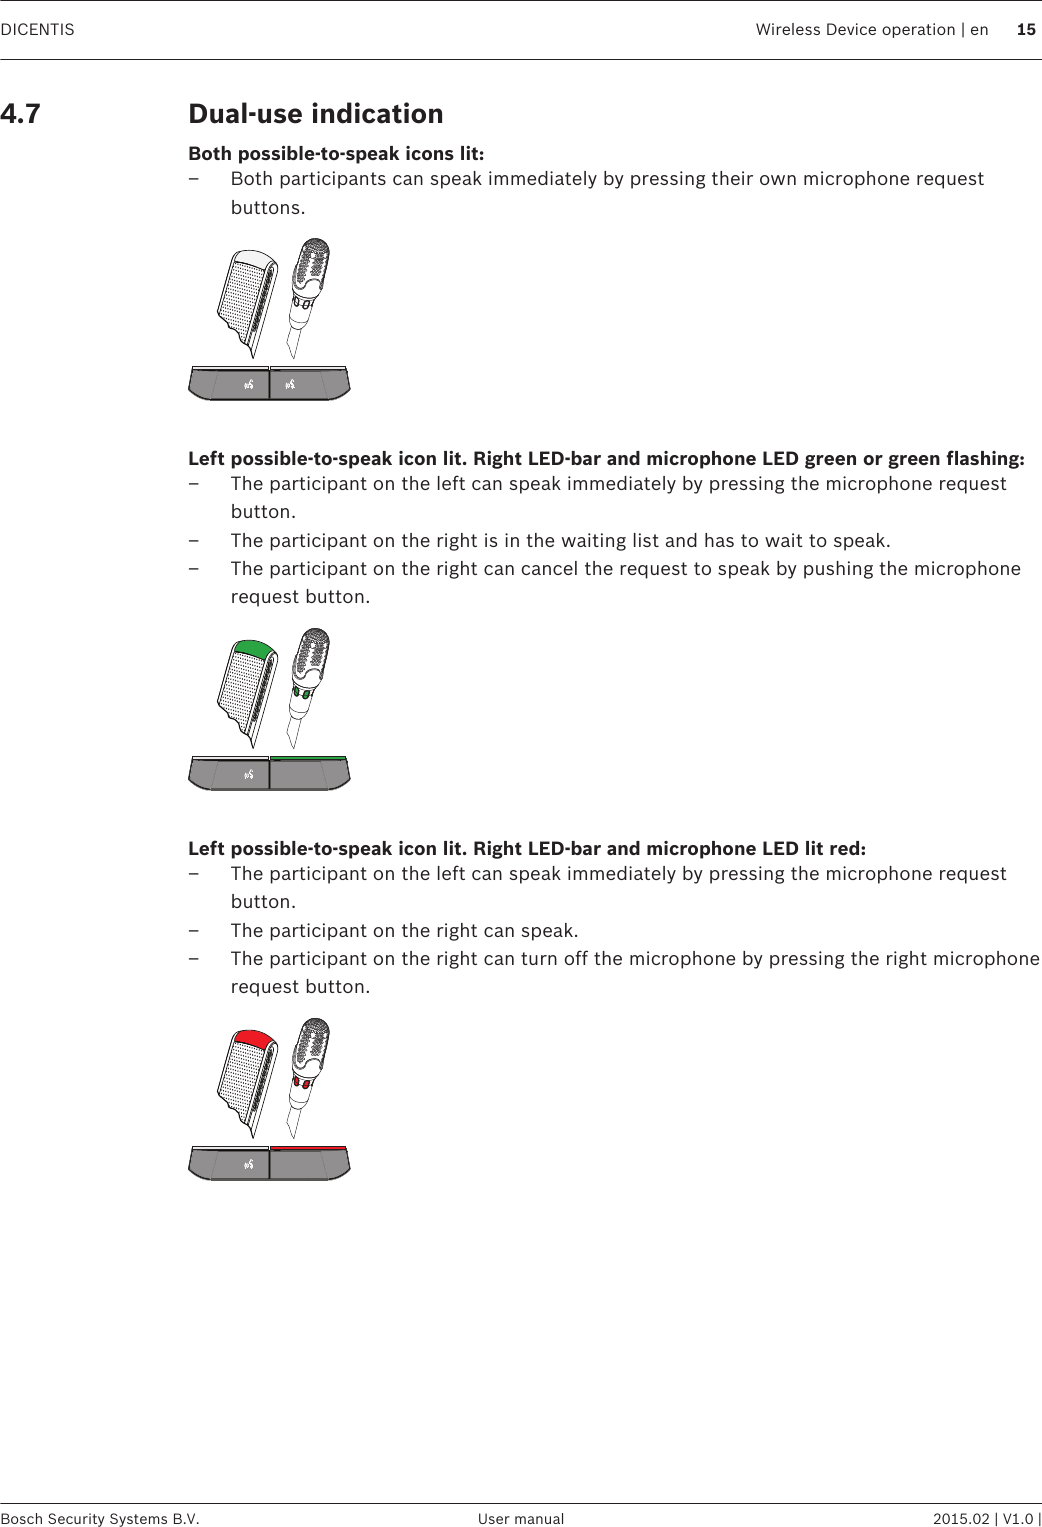 Dual-use indicationBoth possible-to-speak icons lit:– Both participants can speak immediately by pressing their own microphone requestbuttons. Left possible-to-speak icon lit. Right LED-bar and microphone LED green or green flashing:– The participant on the left can speak immediately by pressing the microphone requestbutton.– The participant on the right is in the waiting list and has to wait to speak.– The participant on the right can cancel the request to speak by pushing the microphonerequest button. Left possible-to-speak icon lit. Right LED-bar and microphone LED lit red:– The participant on the left can speak immediately by pressing the microphone requestbutton.– The participant on the right can speak.– The participant on the right can turn off the microphone by pressing the right microphonerequest button.4.7DICENTIS Wireless Device operation | en 15Bosch Security Systems B.V. User manual 2015.02 | V1.0 |